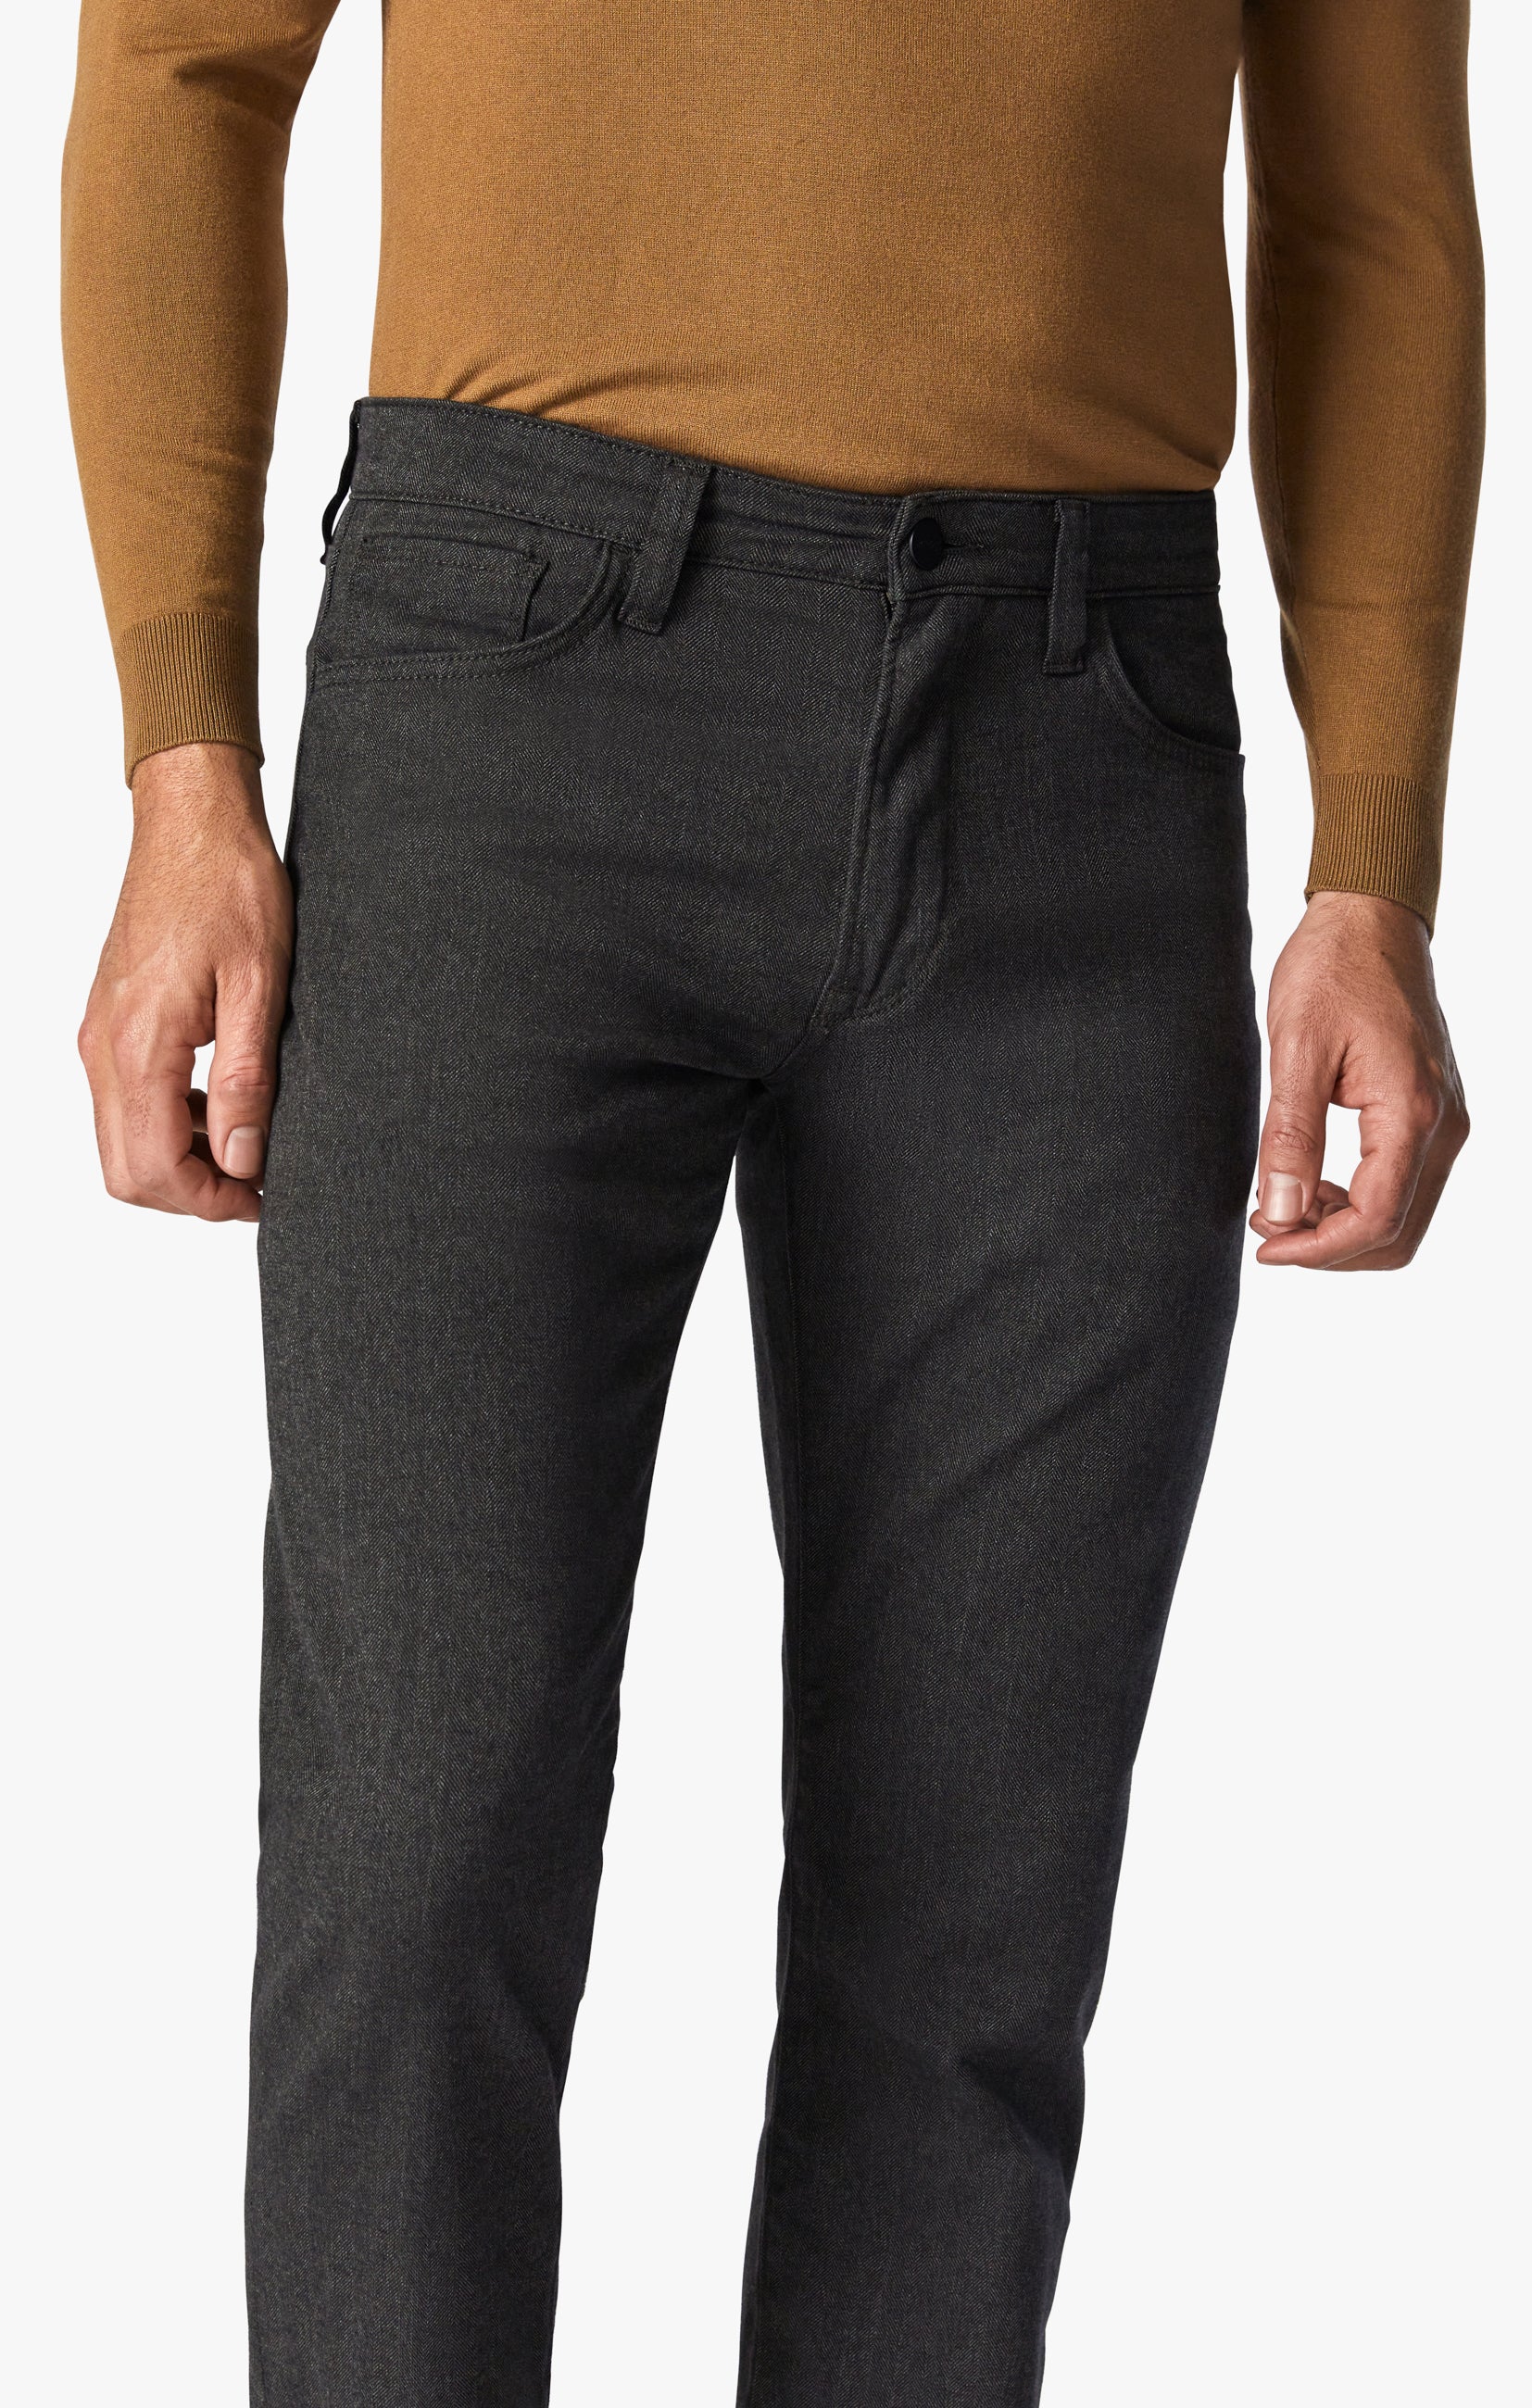 Charisma Relaxed Straight Leg Pants In Anthracite Herringbone Image 6